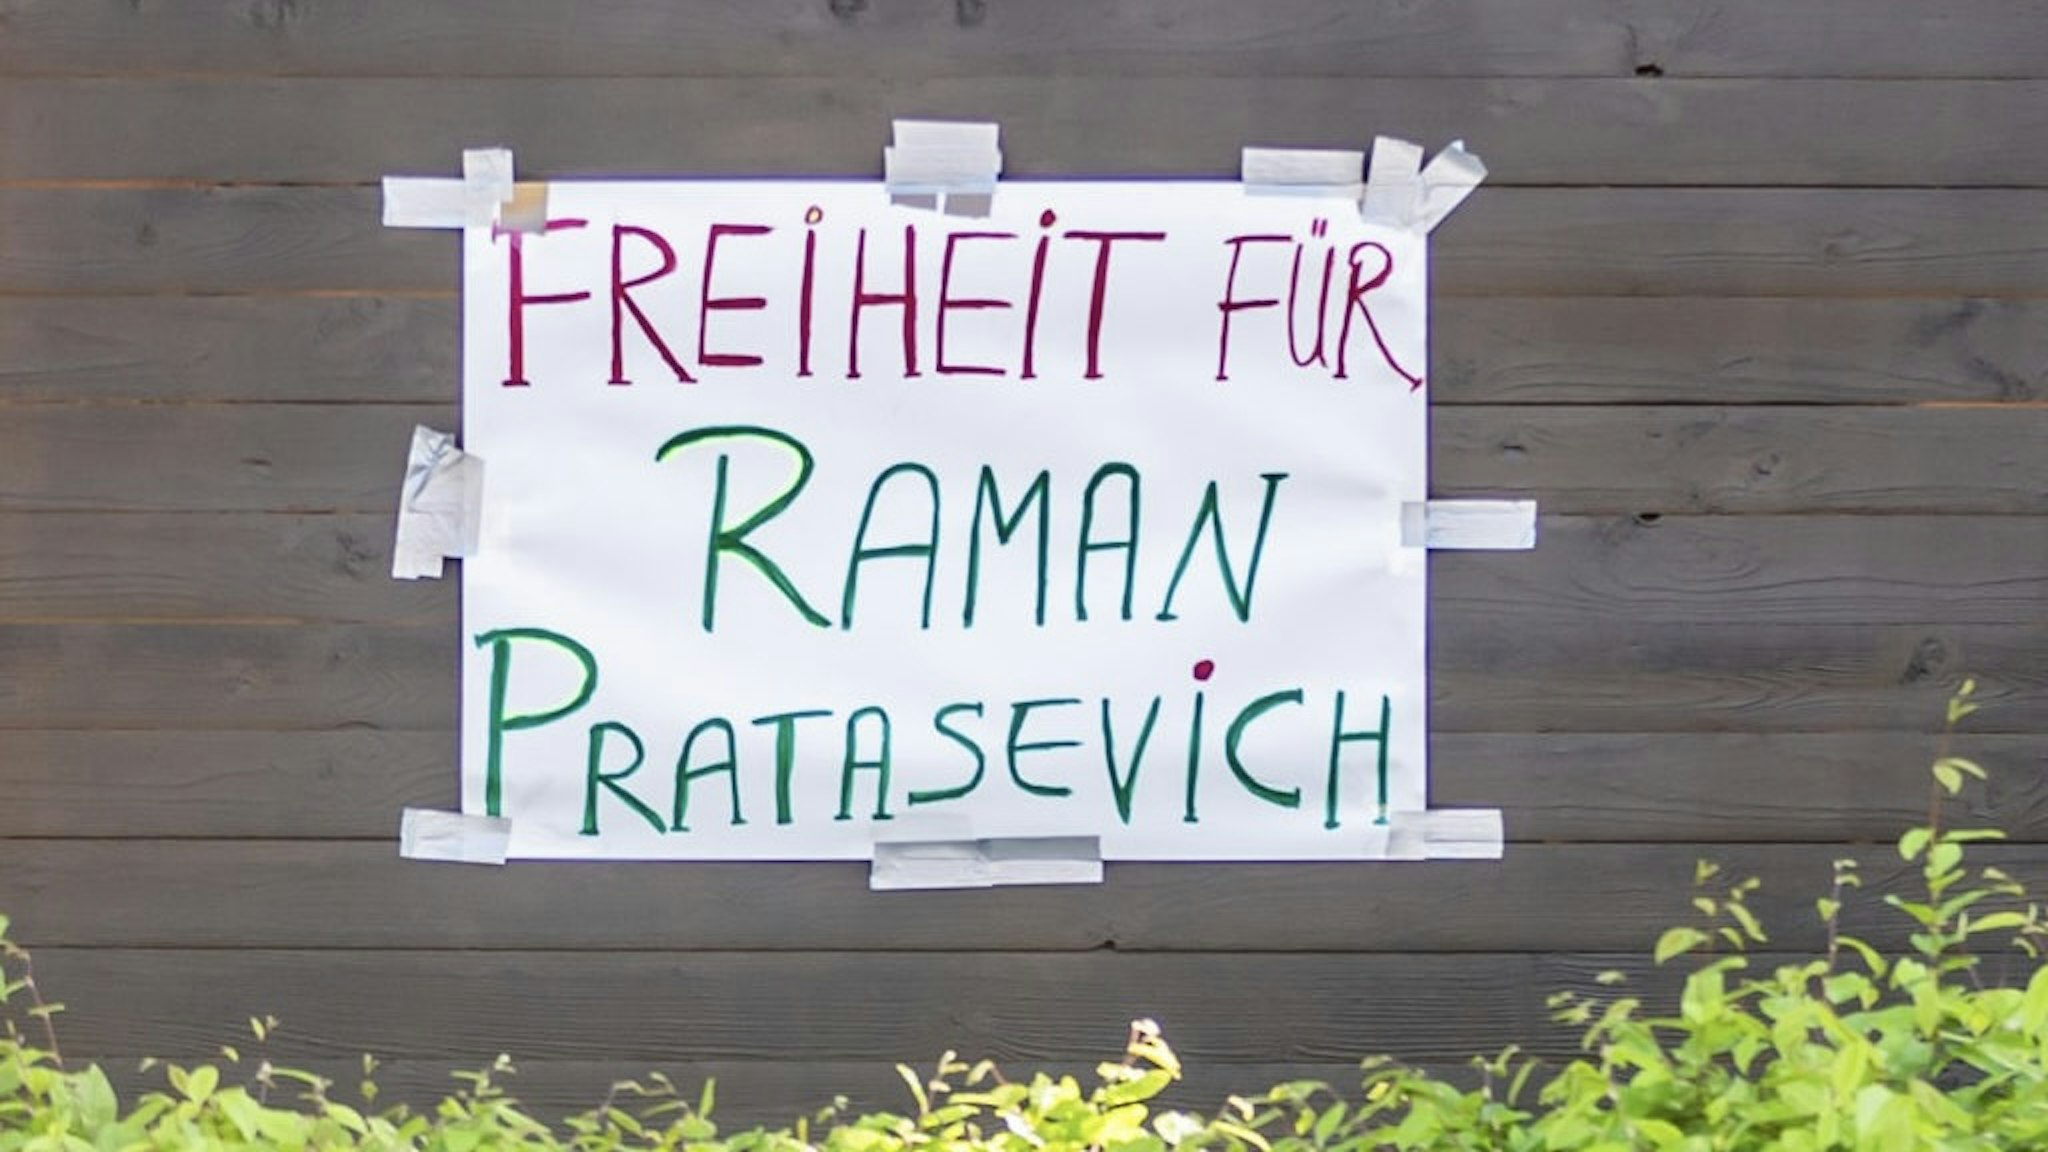 Embassy of Belarus in Berlin 24 May 2021, Berlin: "Freedom for Raman Pratasevich" (Roman Protashevich) is written on a protest wagon in front of the Embassy of Belarus in Berlin. The EU has strongly condemned the forced landing of a scheduled flight by Belarusian authorities in Minsk and held out the prospect of sanctions against those responsible. In addition, EU foreign affairs representative Borrell demanded the immediate release of Belarusian journalist Roman Protasevich on behalf of all 27 EU states. Photo: Christoph Soeder/dpa (Photo by Christoph Soeder/picture alliance picture alliance / Contributor via Getty Images)